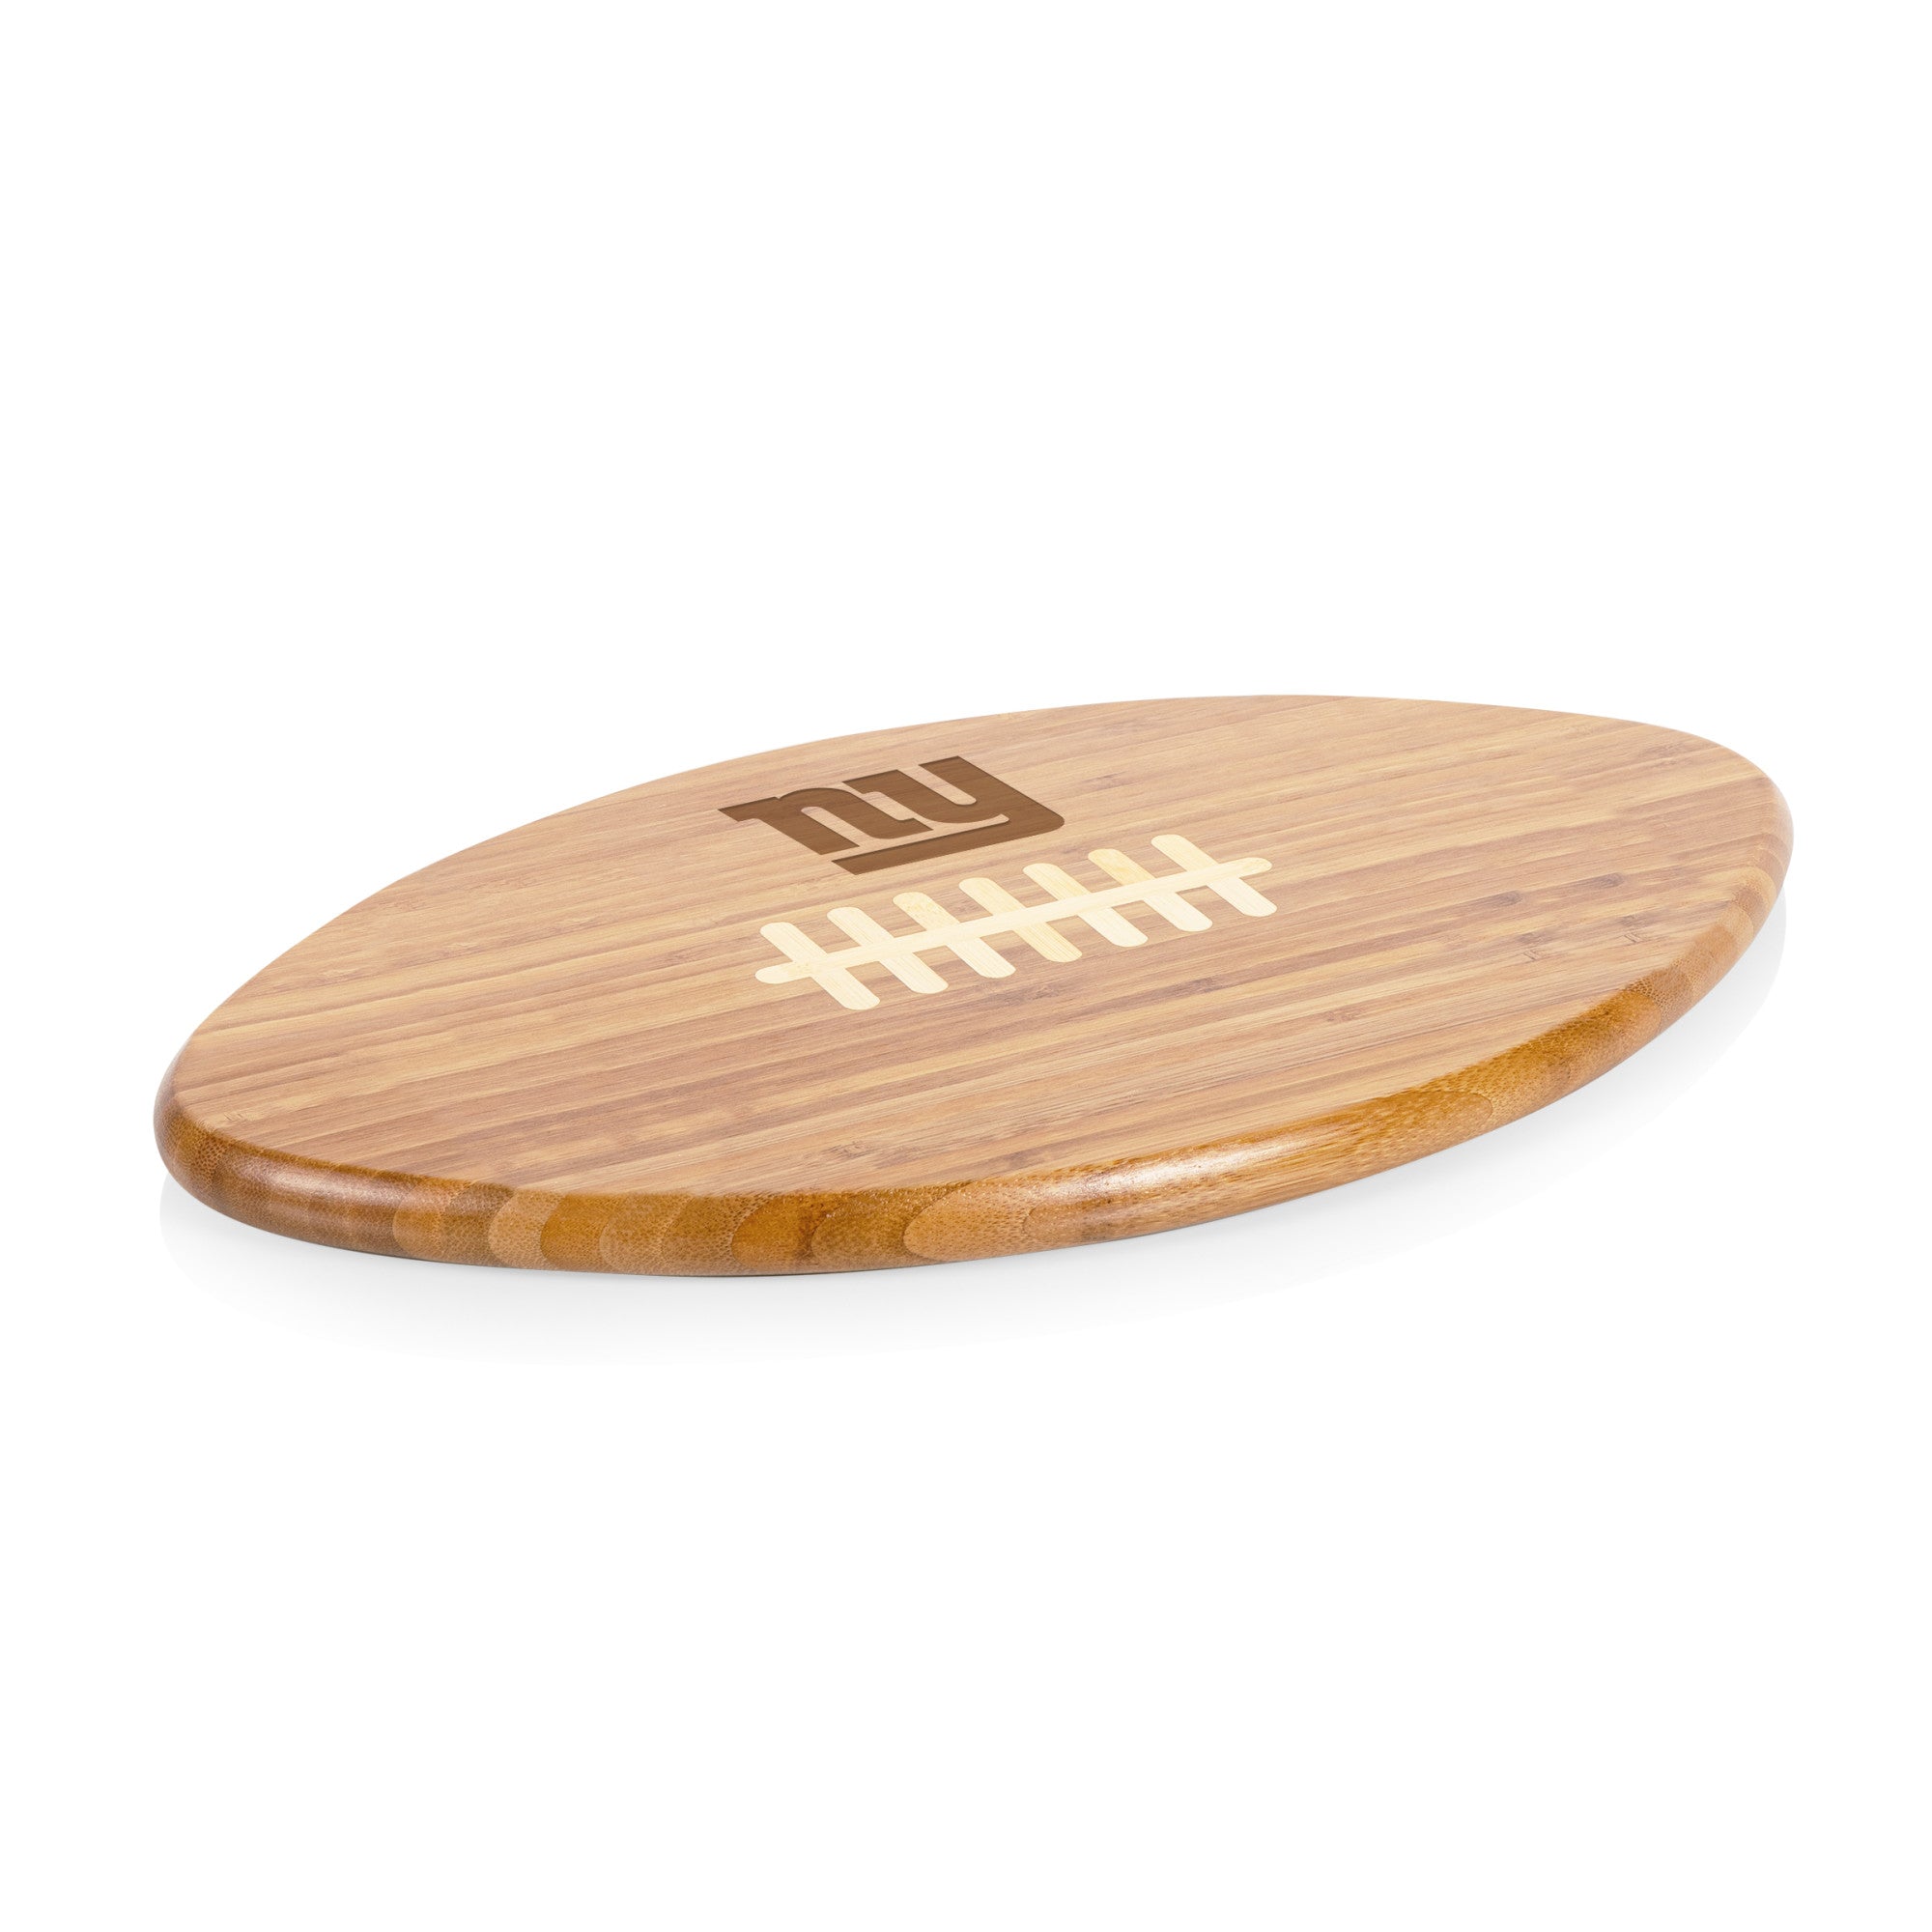 New York Giants - Touchdown! Football Cutting Board & Serving Tray